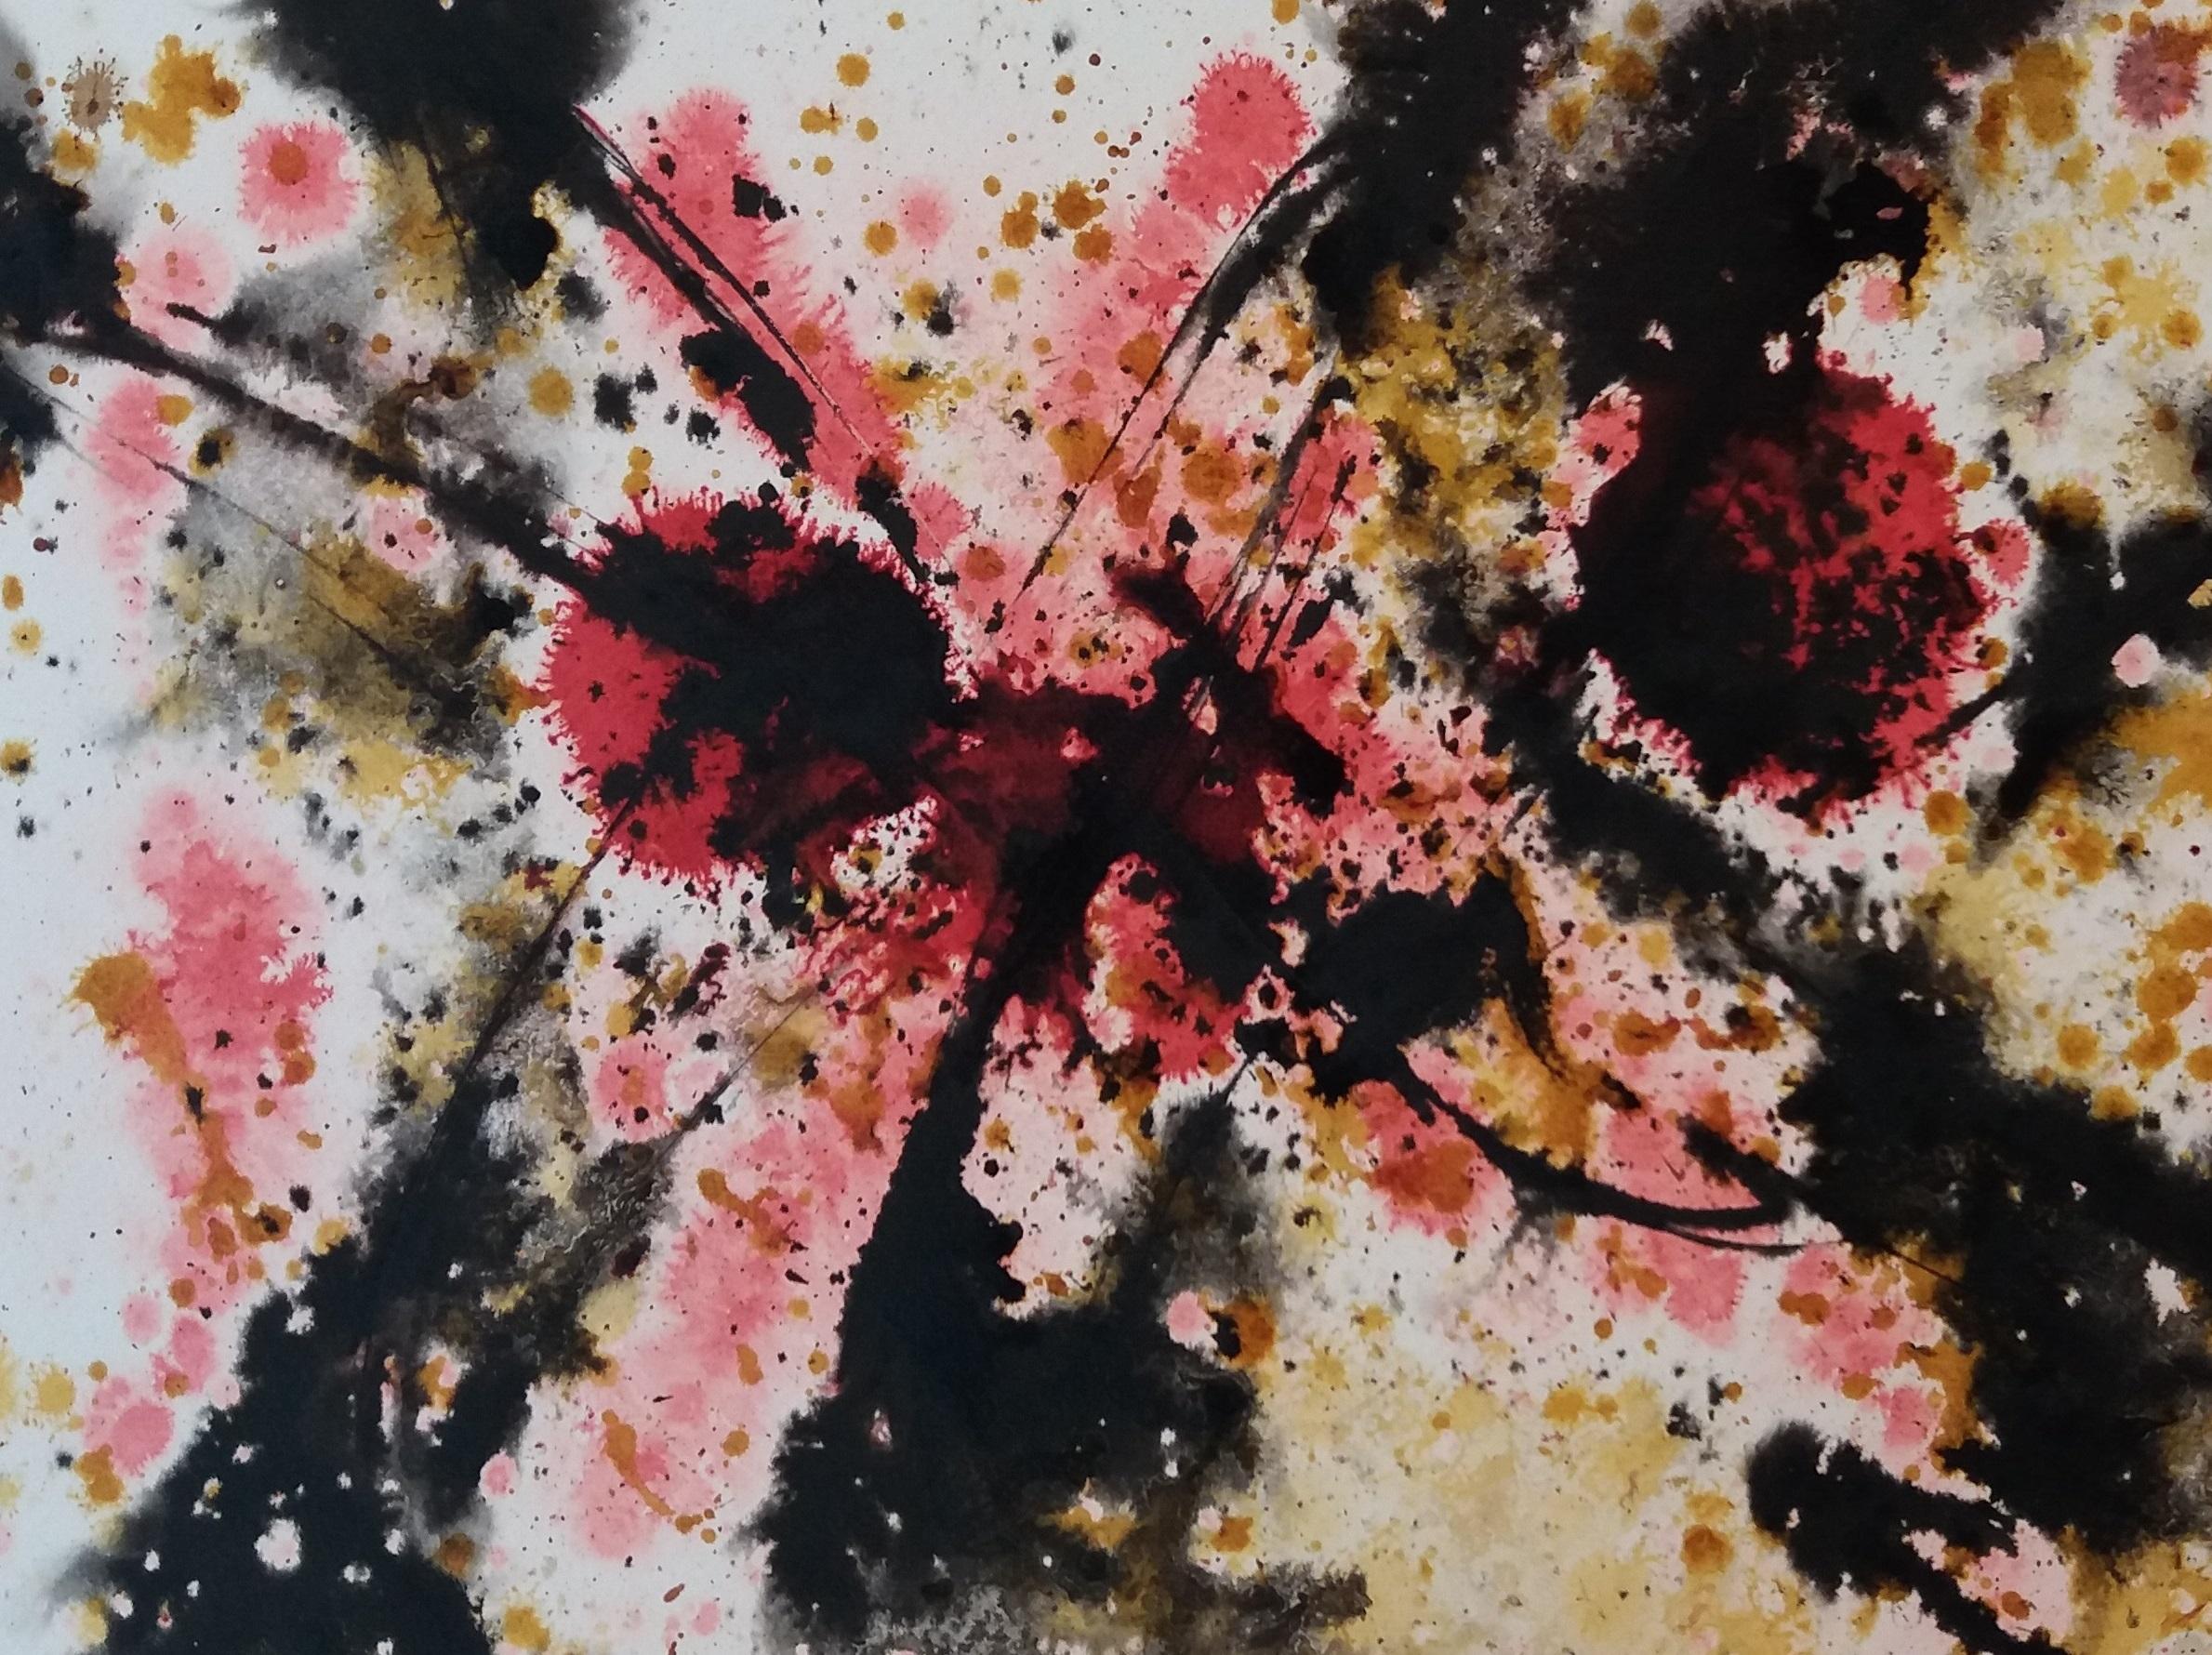 Tharrats  Red  Black  Constellation 7 original acrylic paper painting - Painting by Josep THARRATS